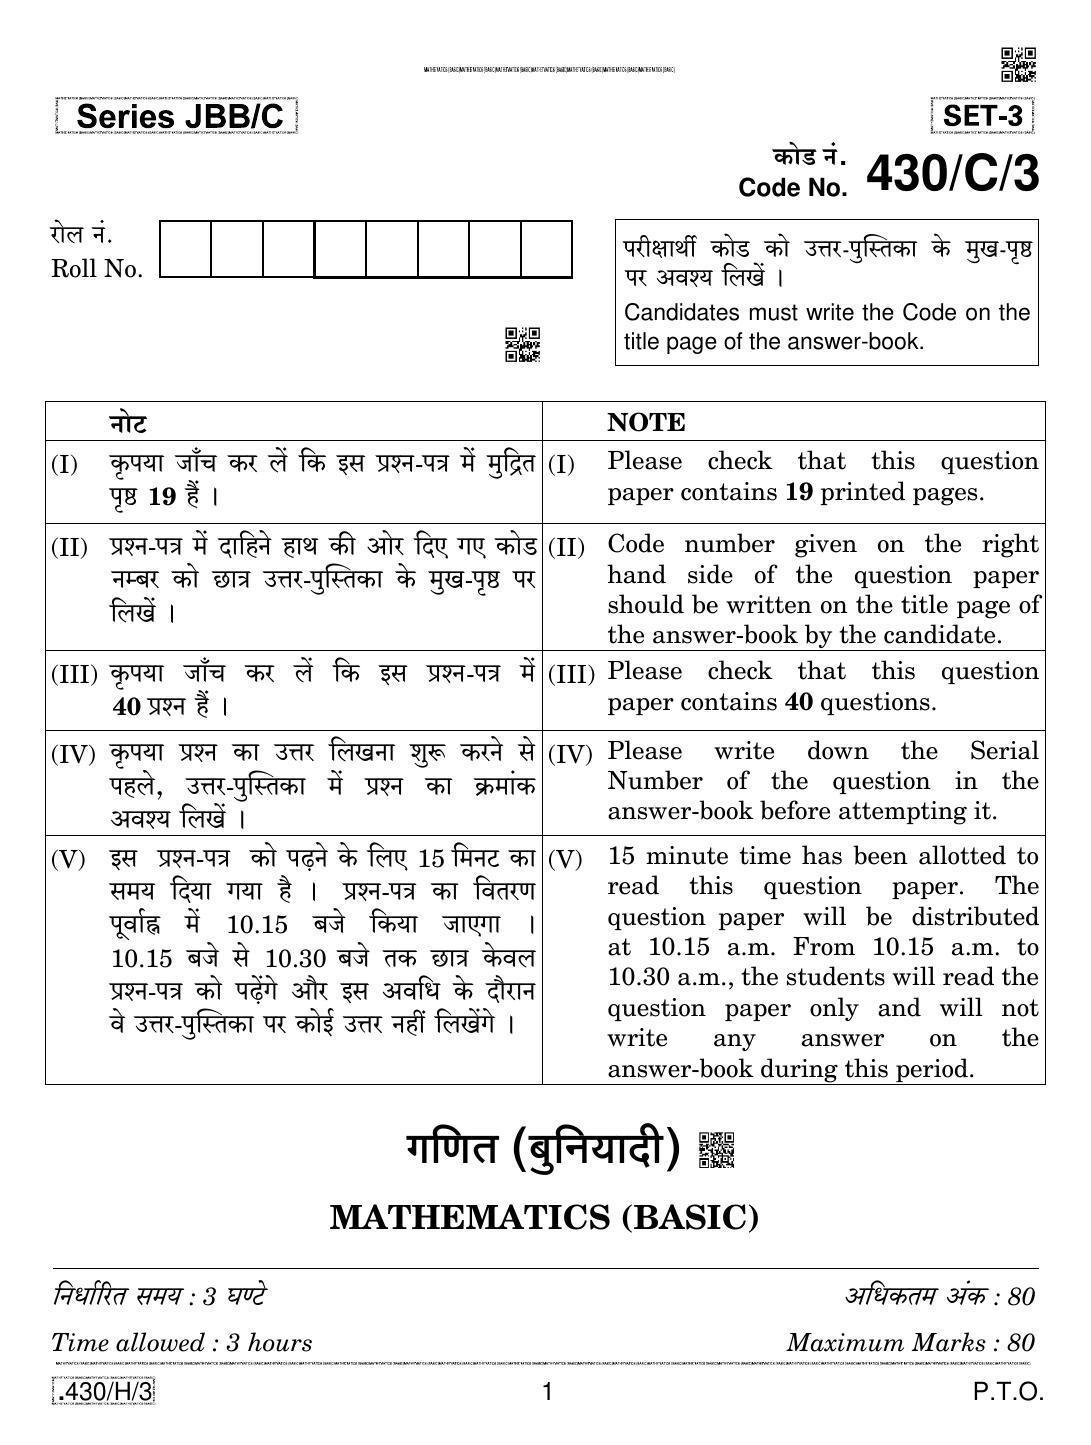 CBSE Class 10 430-C-3 - Maths (Basic) 2020 Compartment Question Paper - Page 1